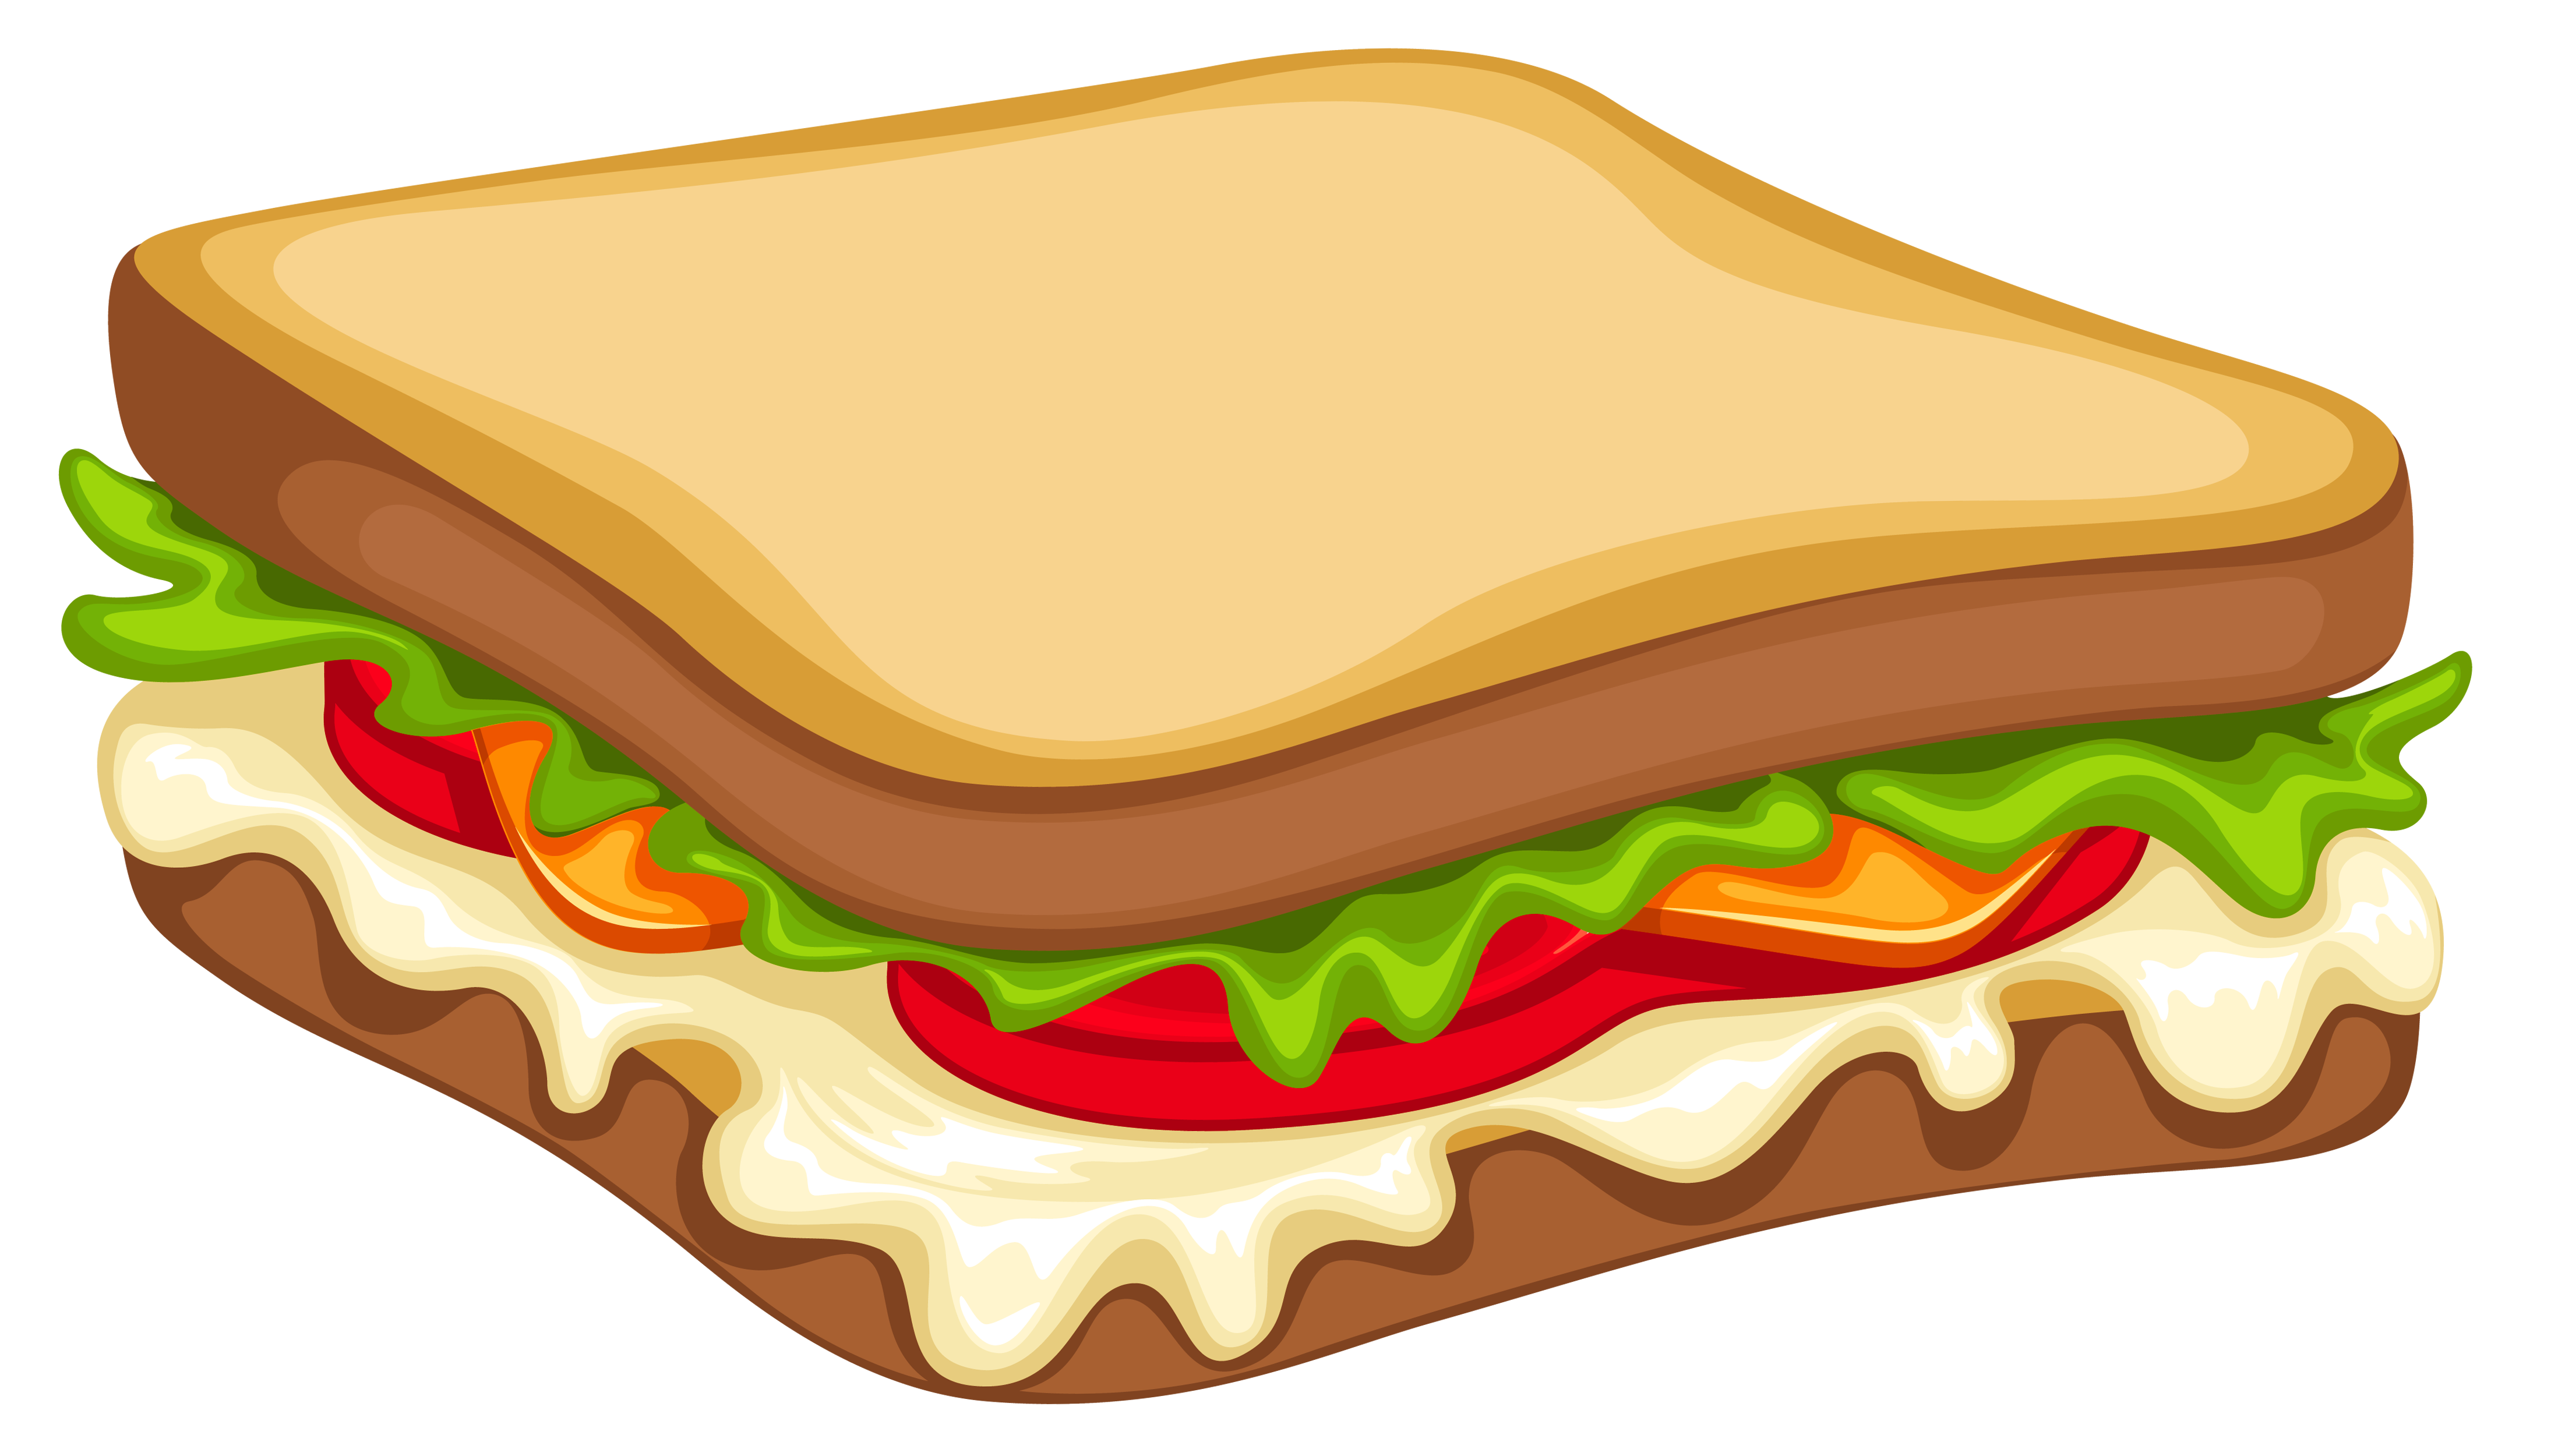 Download Cheese Sandwich Bacon Free HQ Image HQ PNG Image | FreePNGImg